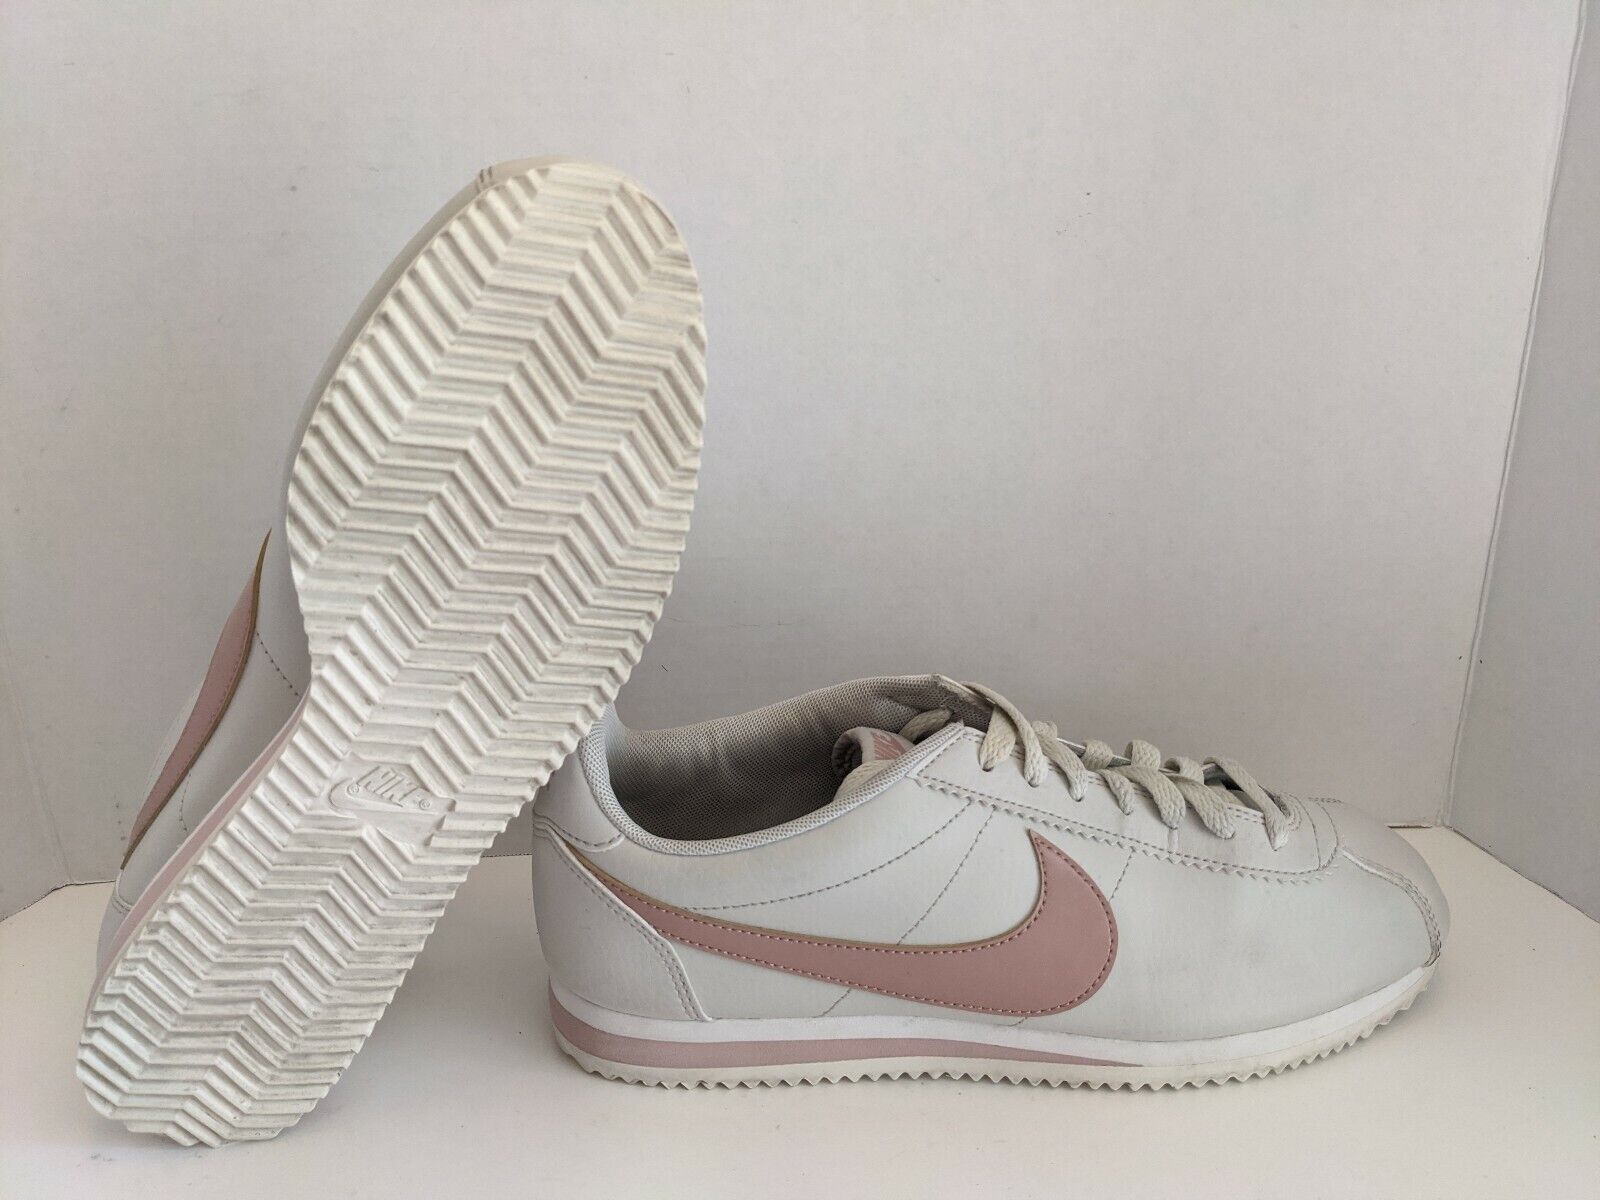 Nike Classic Cortez Leather Shoes 